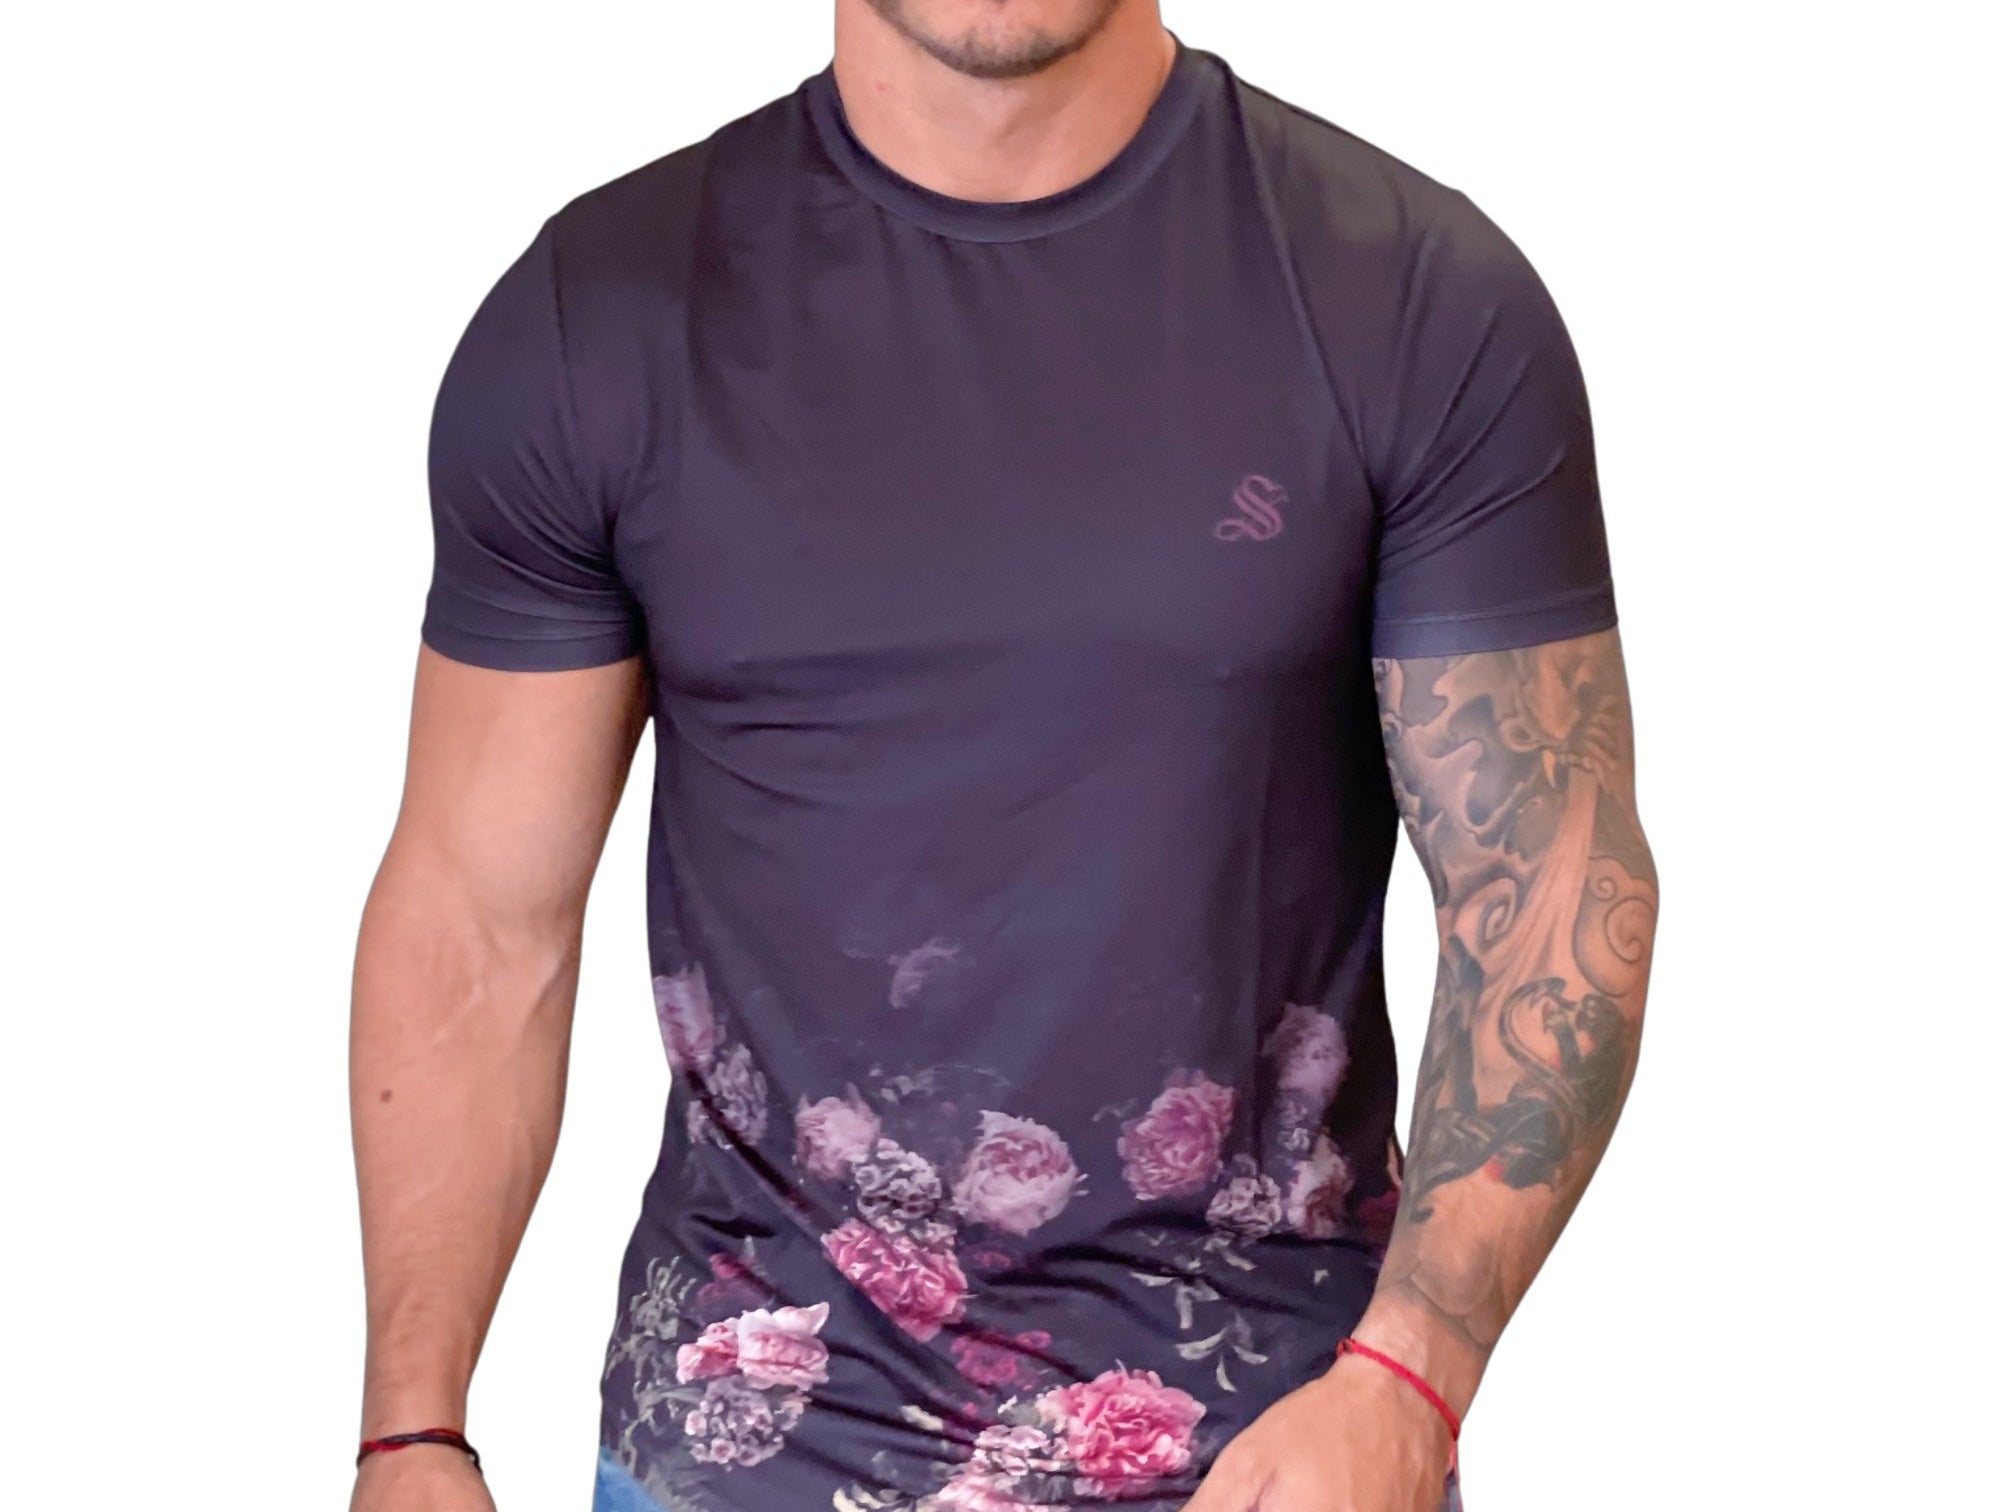 Malokia - T-Shirt for Men (PRE-ORDER DISPATCH DATE 1 JULY 2022) - Sarman Fashion - Wholesale Clothing Fashion Brand for Men from Canada